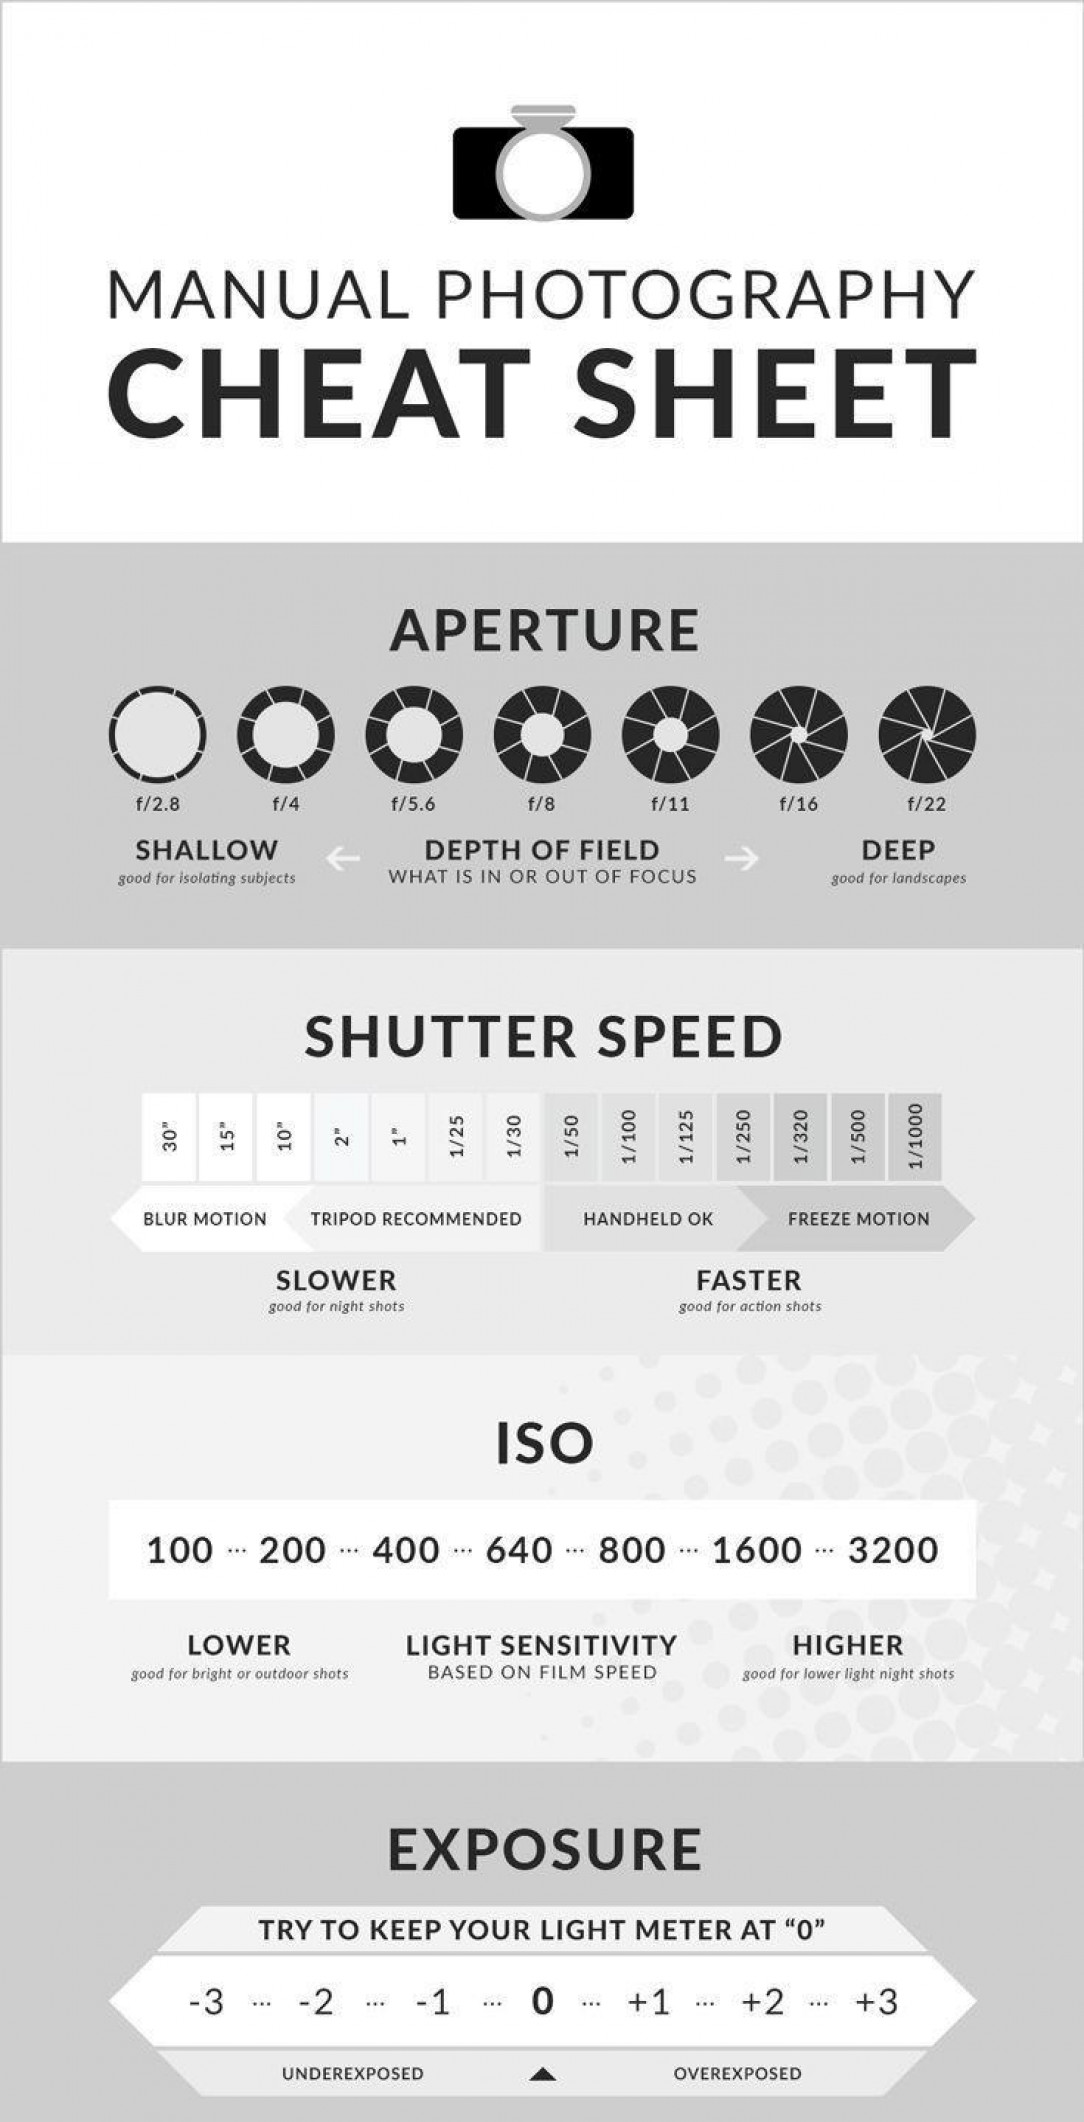 This little guide to understand the basics of photography I found